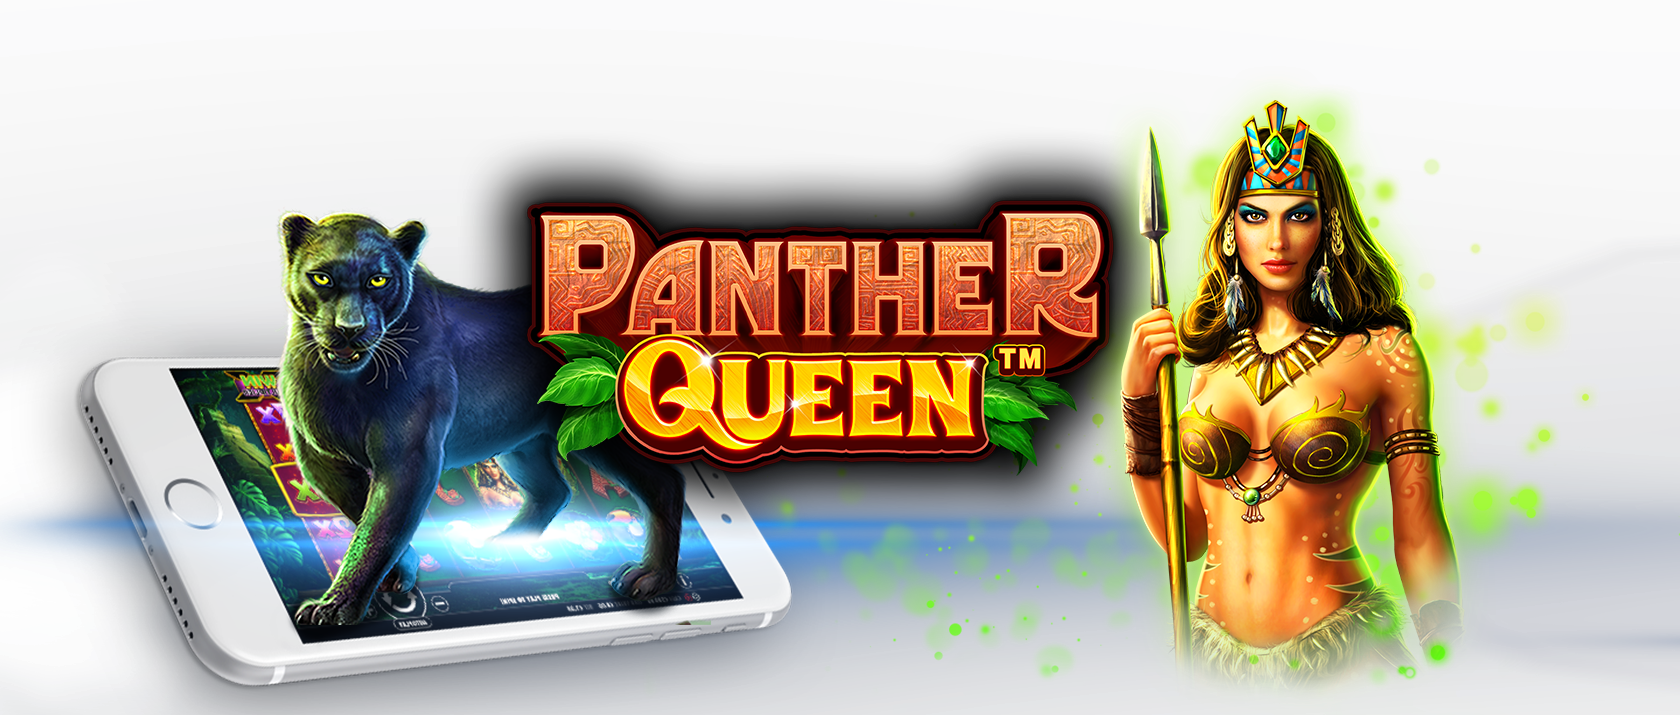 panther queen slots game logo